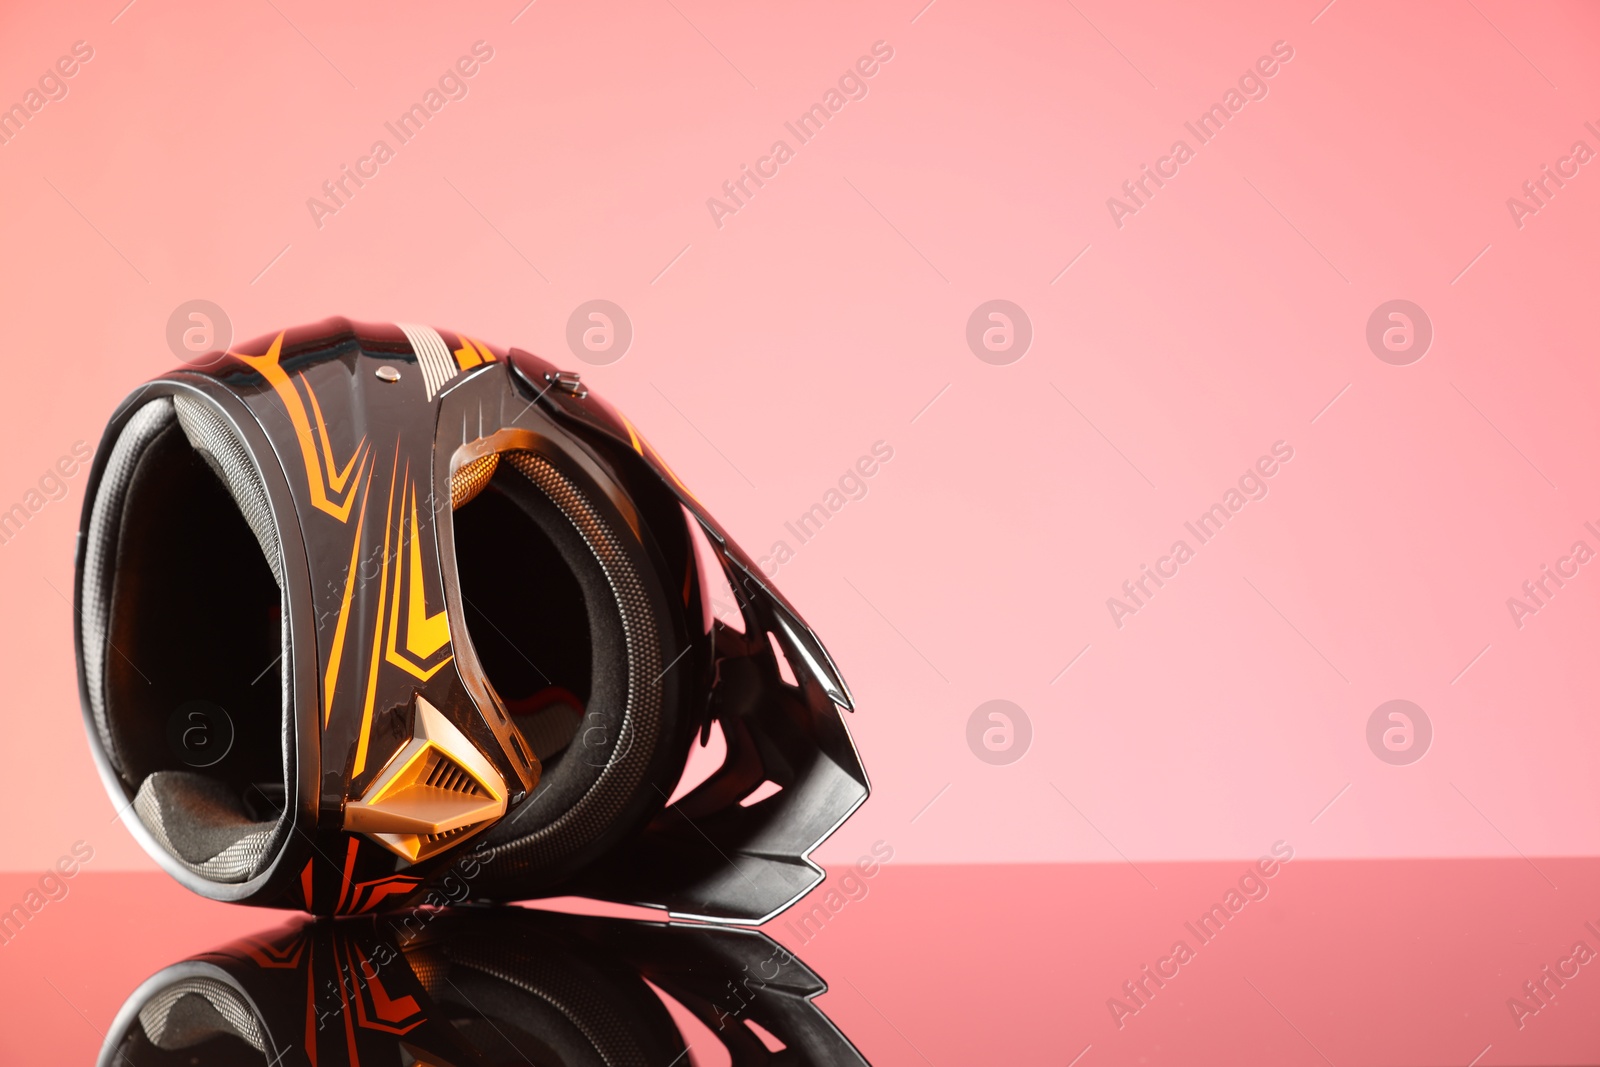 Photo of Modern motorcycle helmet with visor on mirror surface against pink background. Space for text